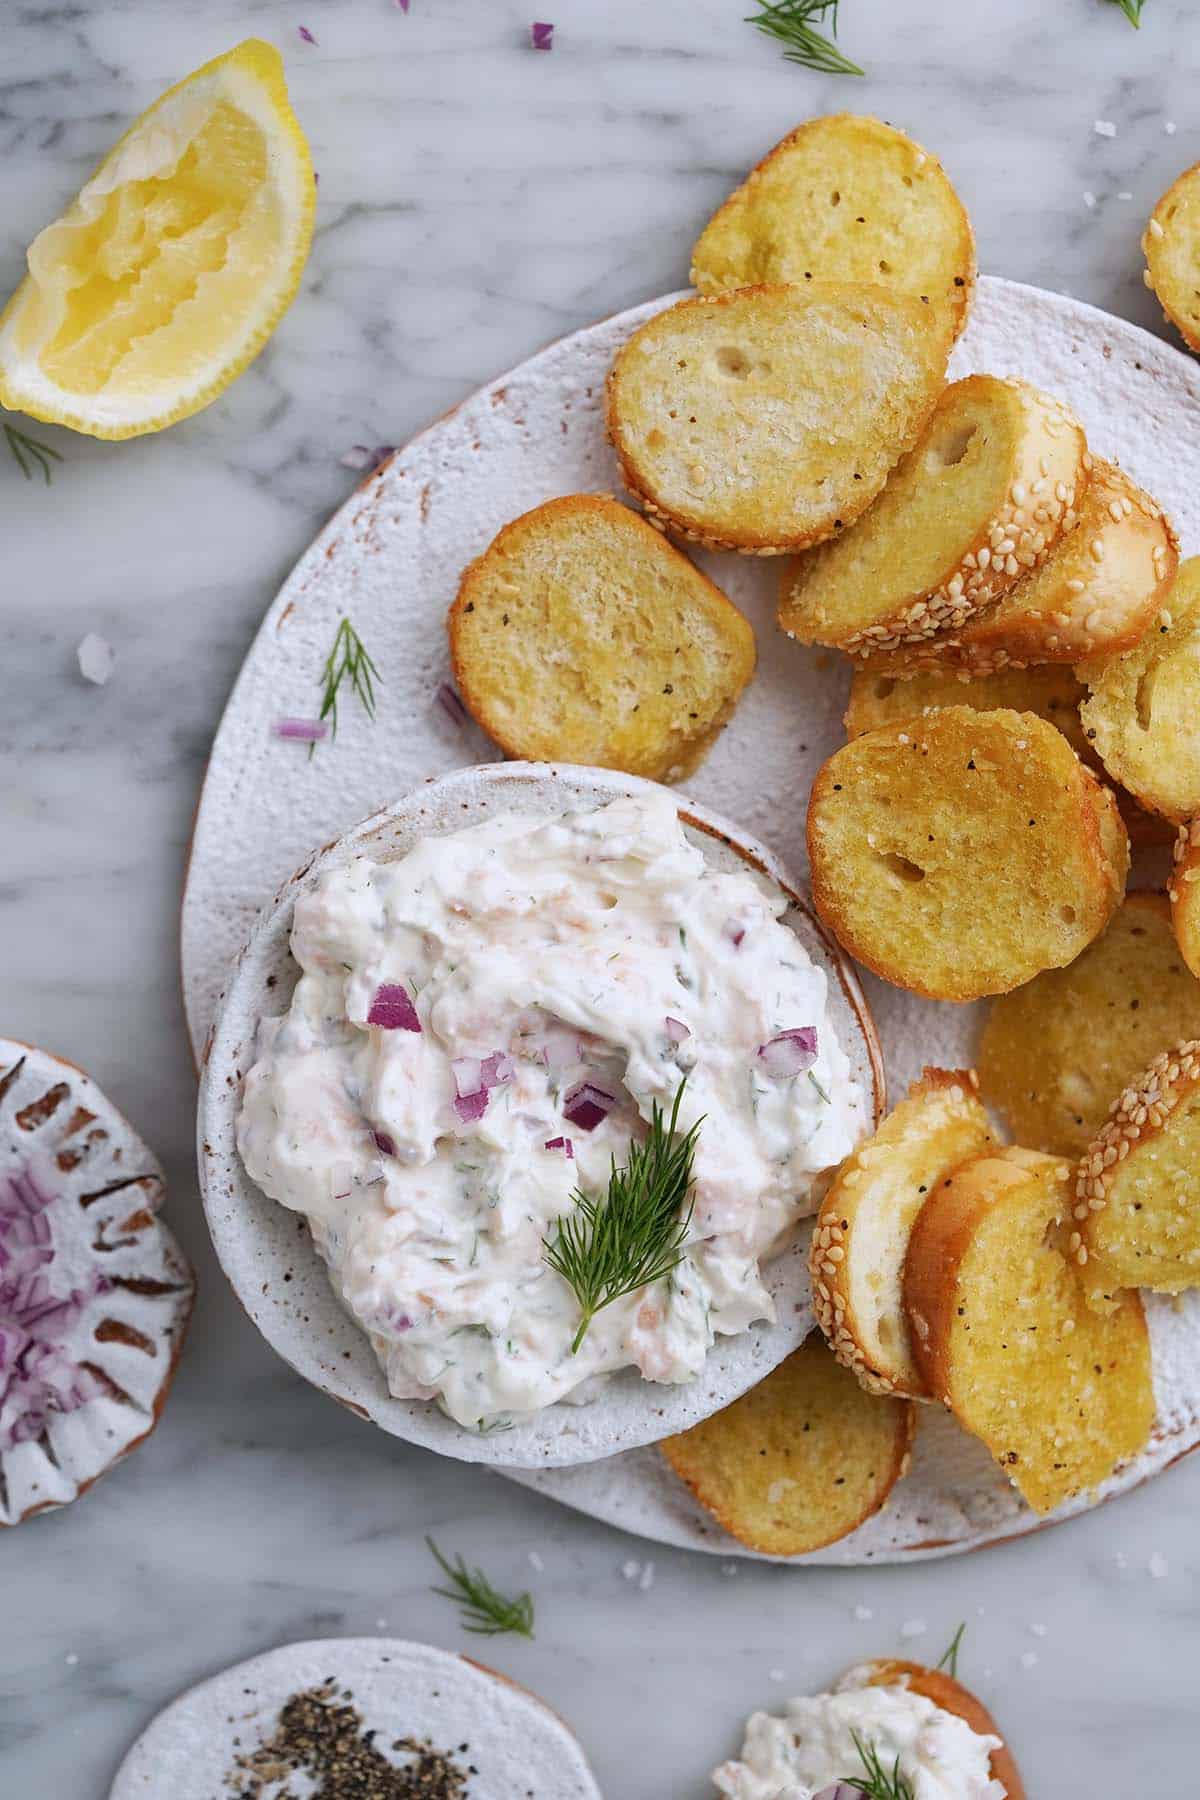 top view of smoked salmon dip and bagel chips on rustic white plate on marble countertop